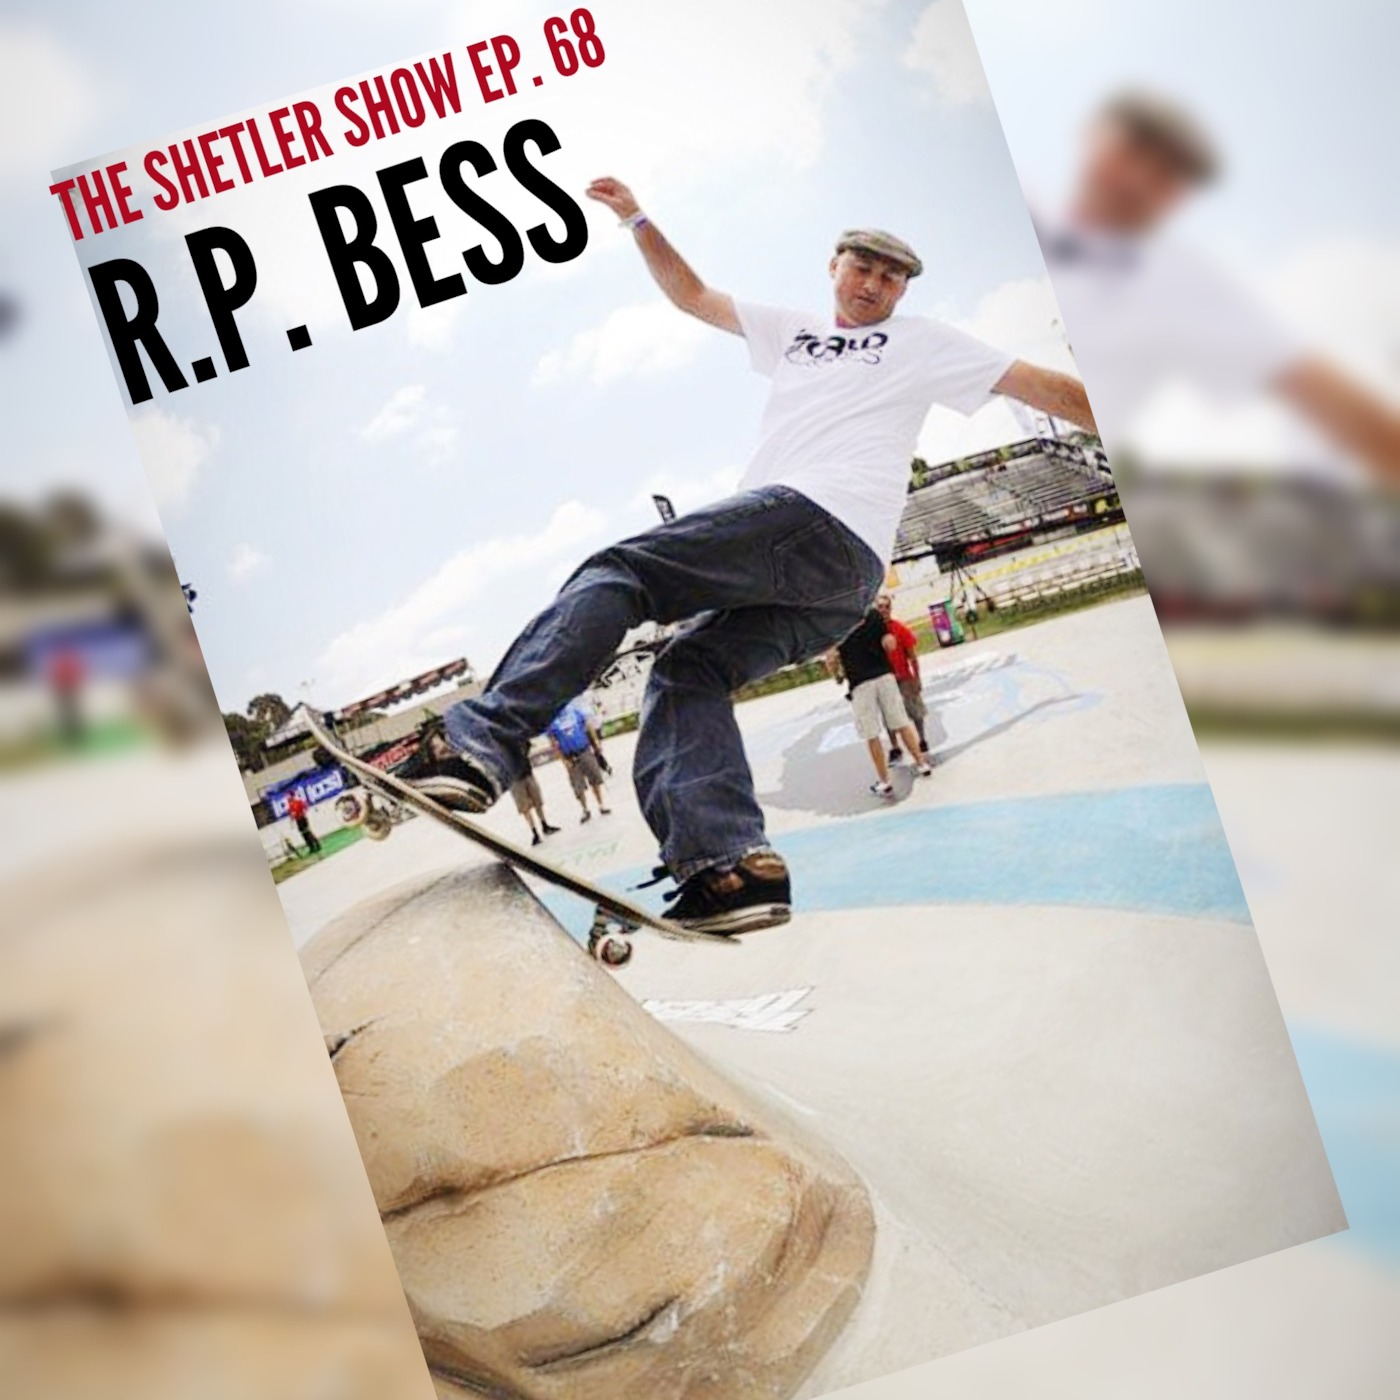 Episode 68: RP Bess (brand manager World footwear) - ALL I NEED SKATE PODCAST